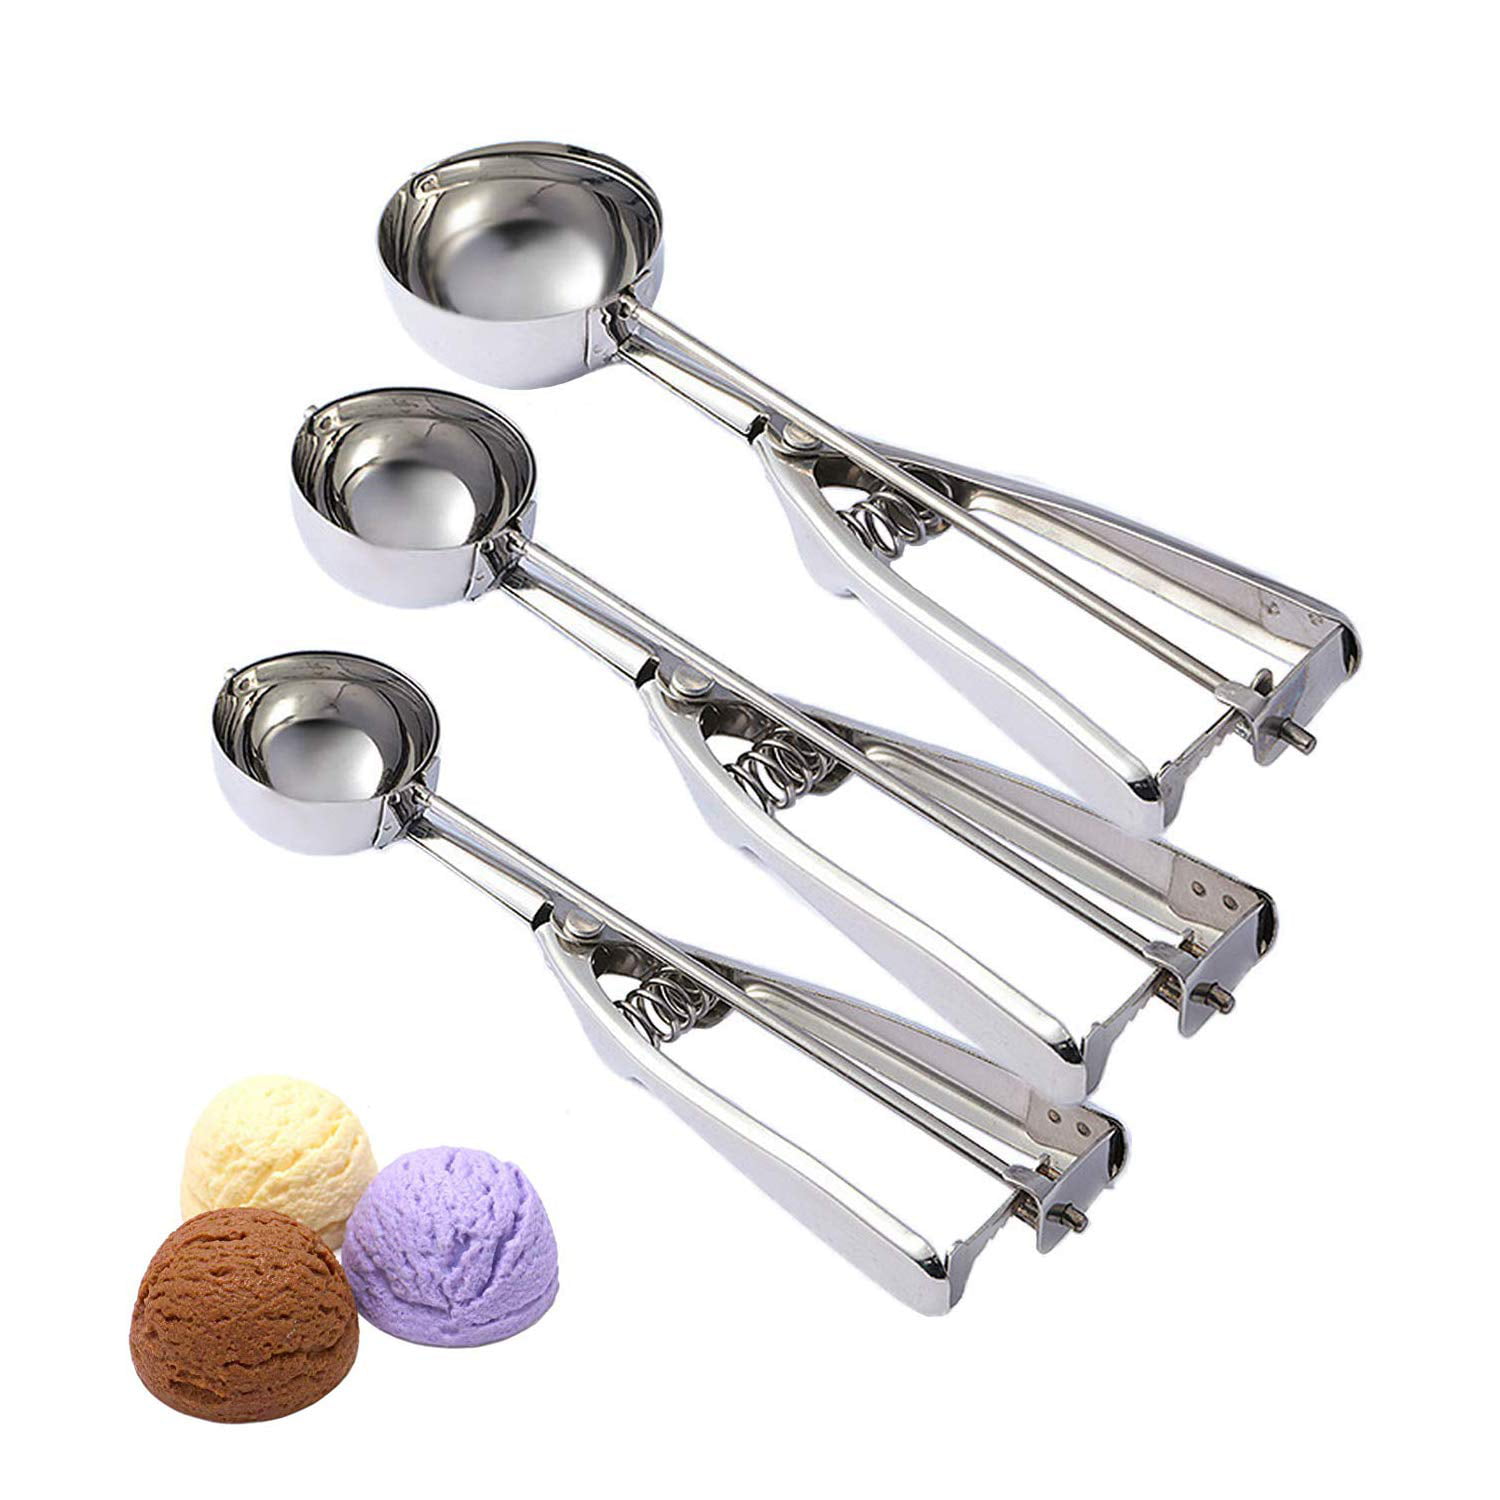 SZ-JIAHAIYU Stainless Steel Ice Cream Scoop Chef Soup spoon Cookie Scoop Cupcake Scoop with Trigger 18/8Medical Stainless Steel Used to Baking Cookie Making a Mold Model 